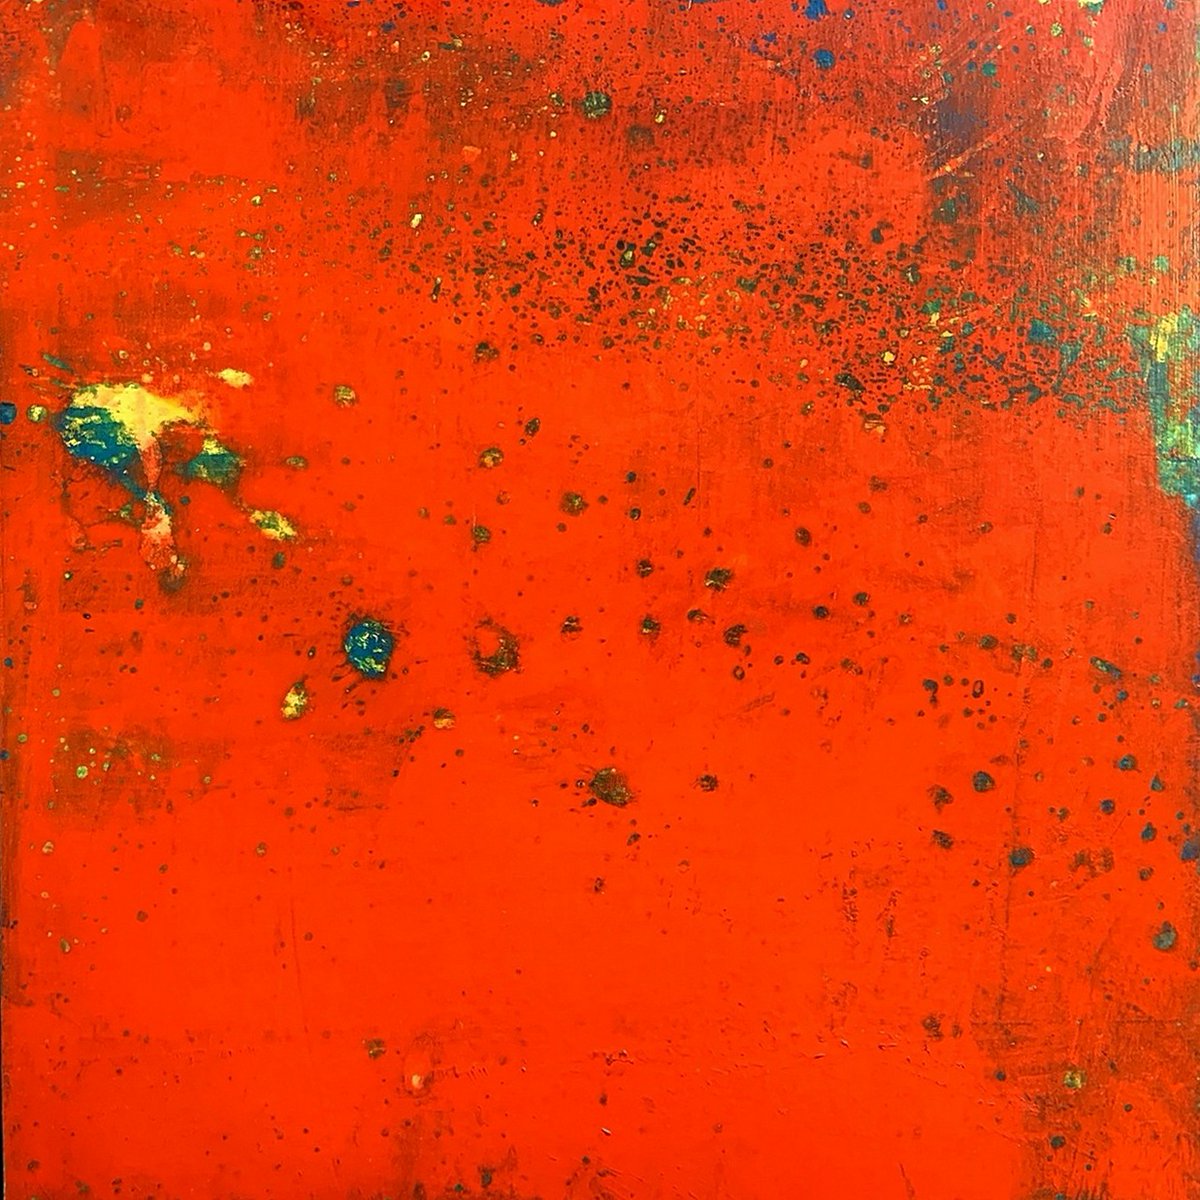 Hello on this rainy Sunday morning! A warm piece for you today - Stolen Time 111, acrylic on card, 27x27 cm, float mounted & framed in white. Available directly from the studio #SundayMorning #red #painting #abstract #richardheys #artinkent #artinsussex